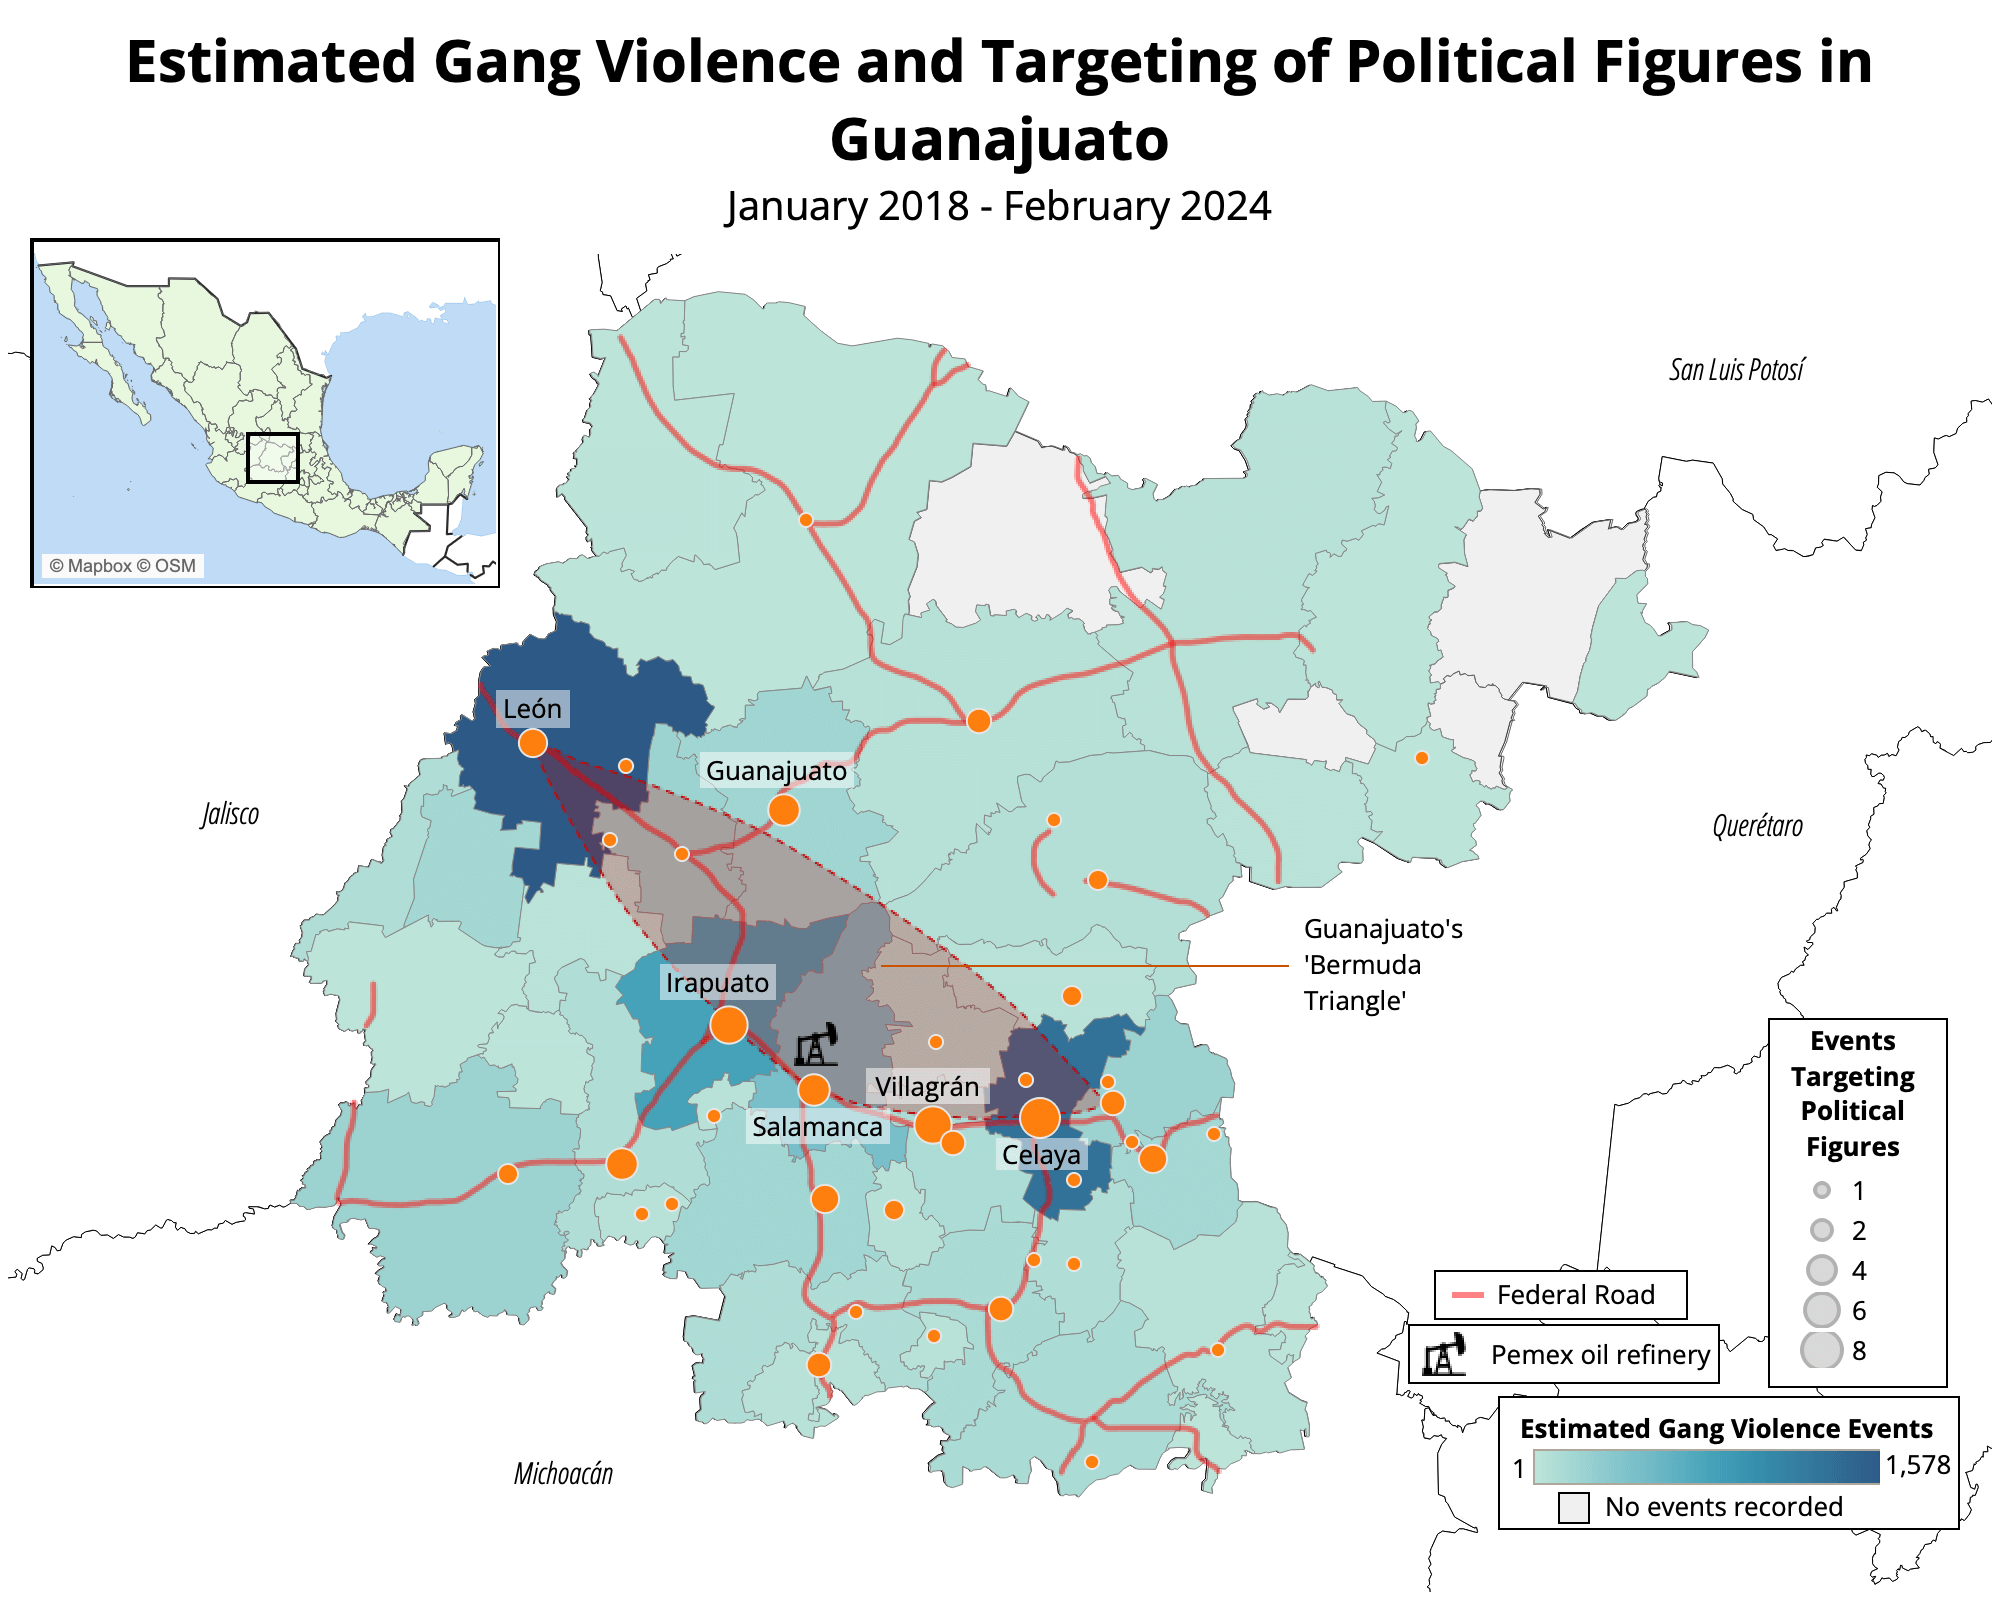 Estimated Gang violence and targeting of political figures in Guanajuato